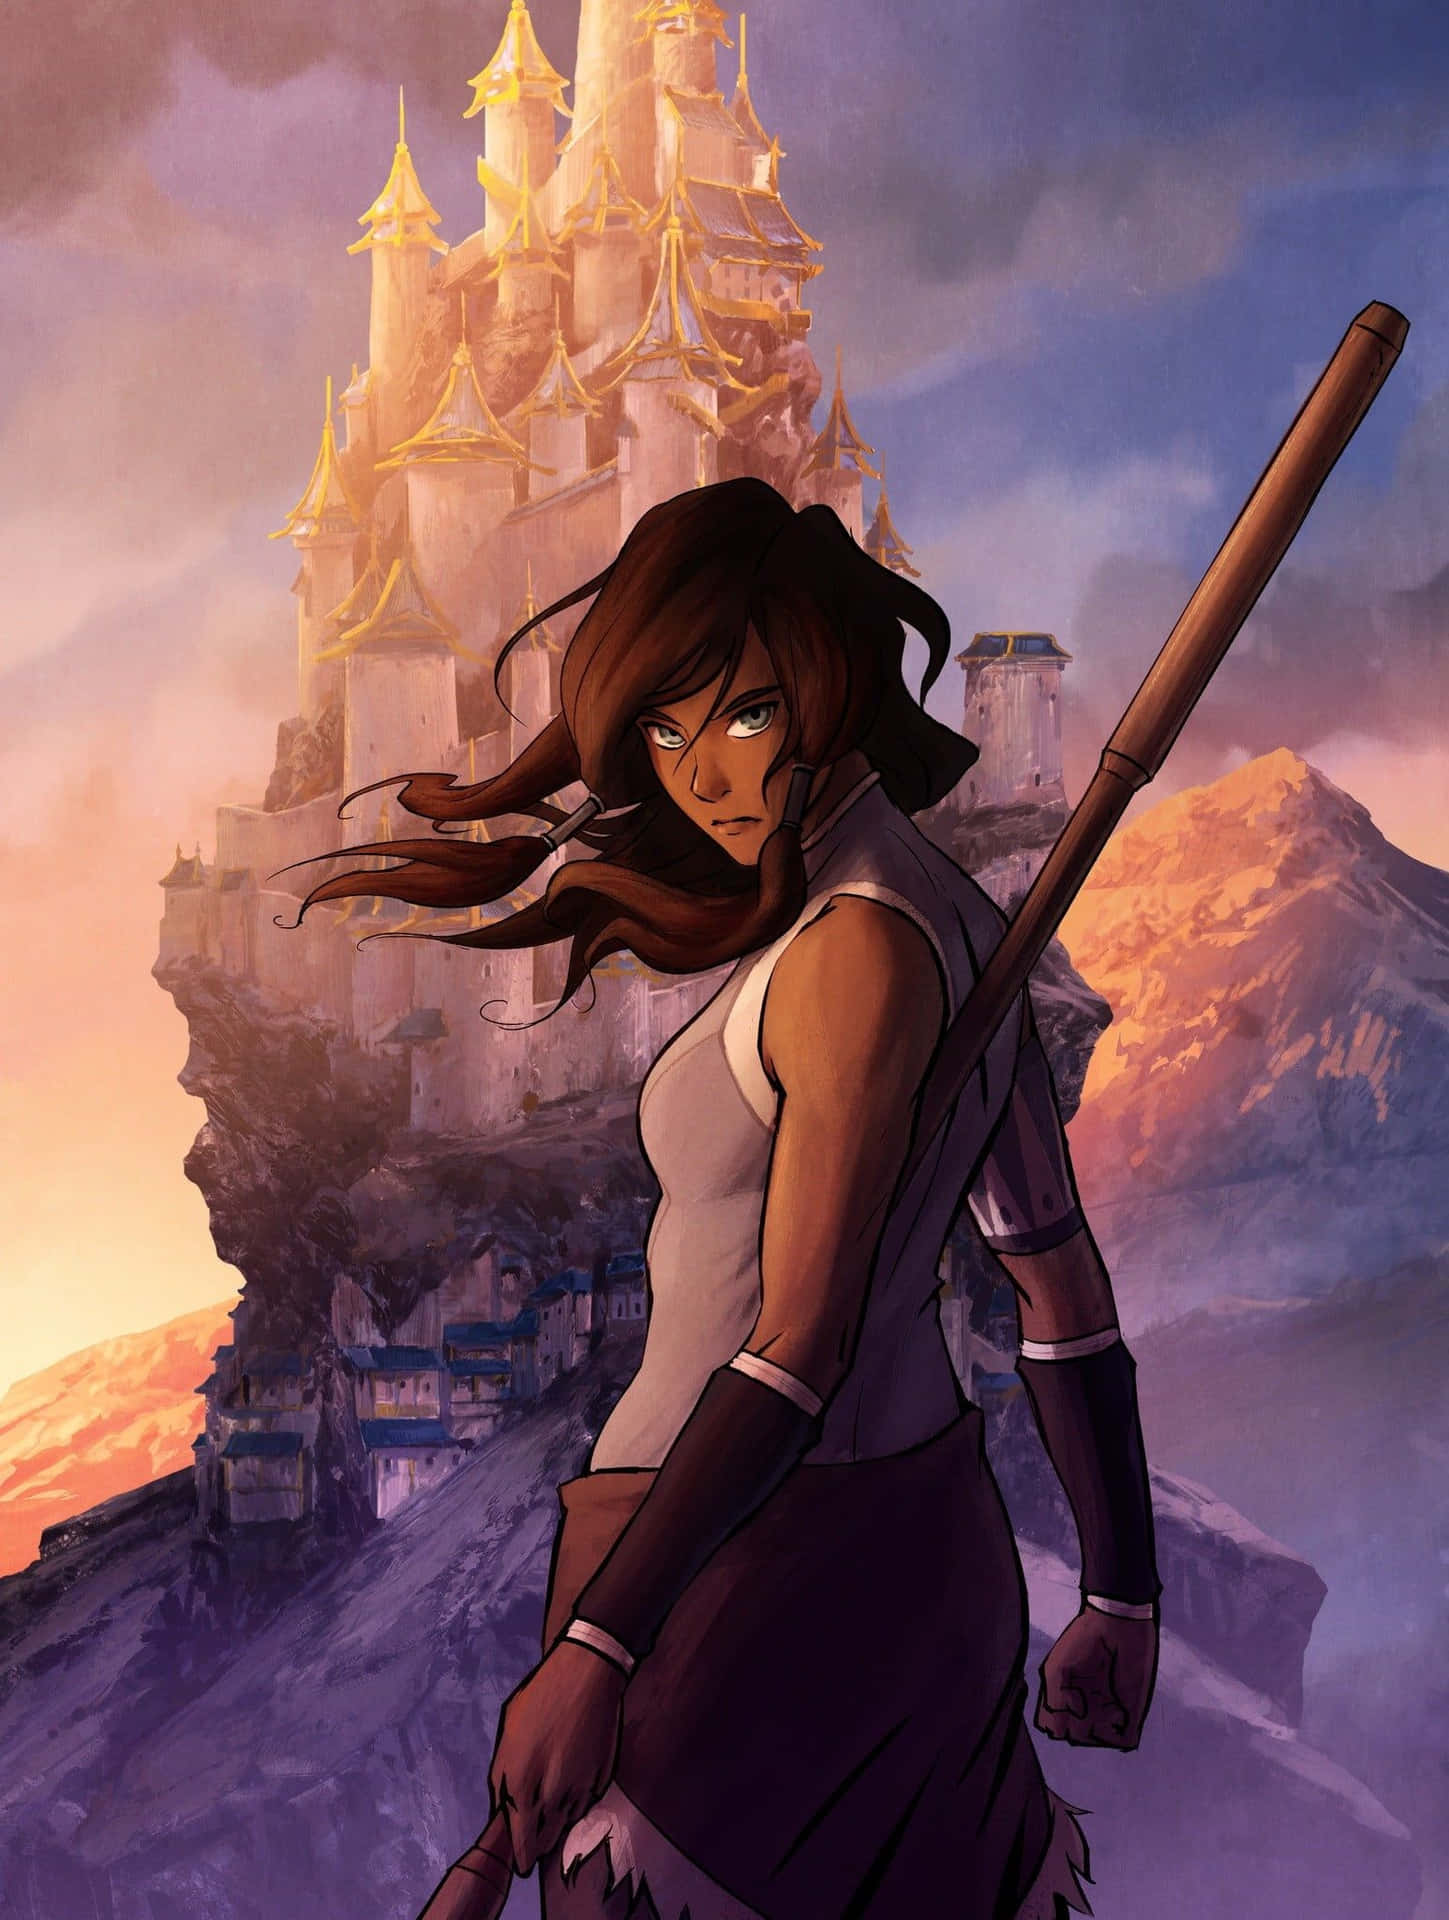 Korra Is Ready To Take On Her New Quest